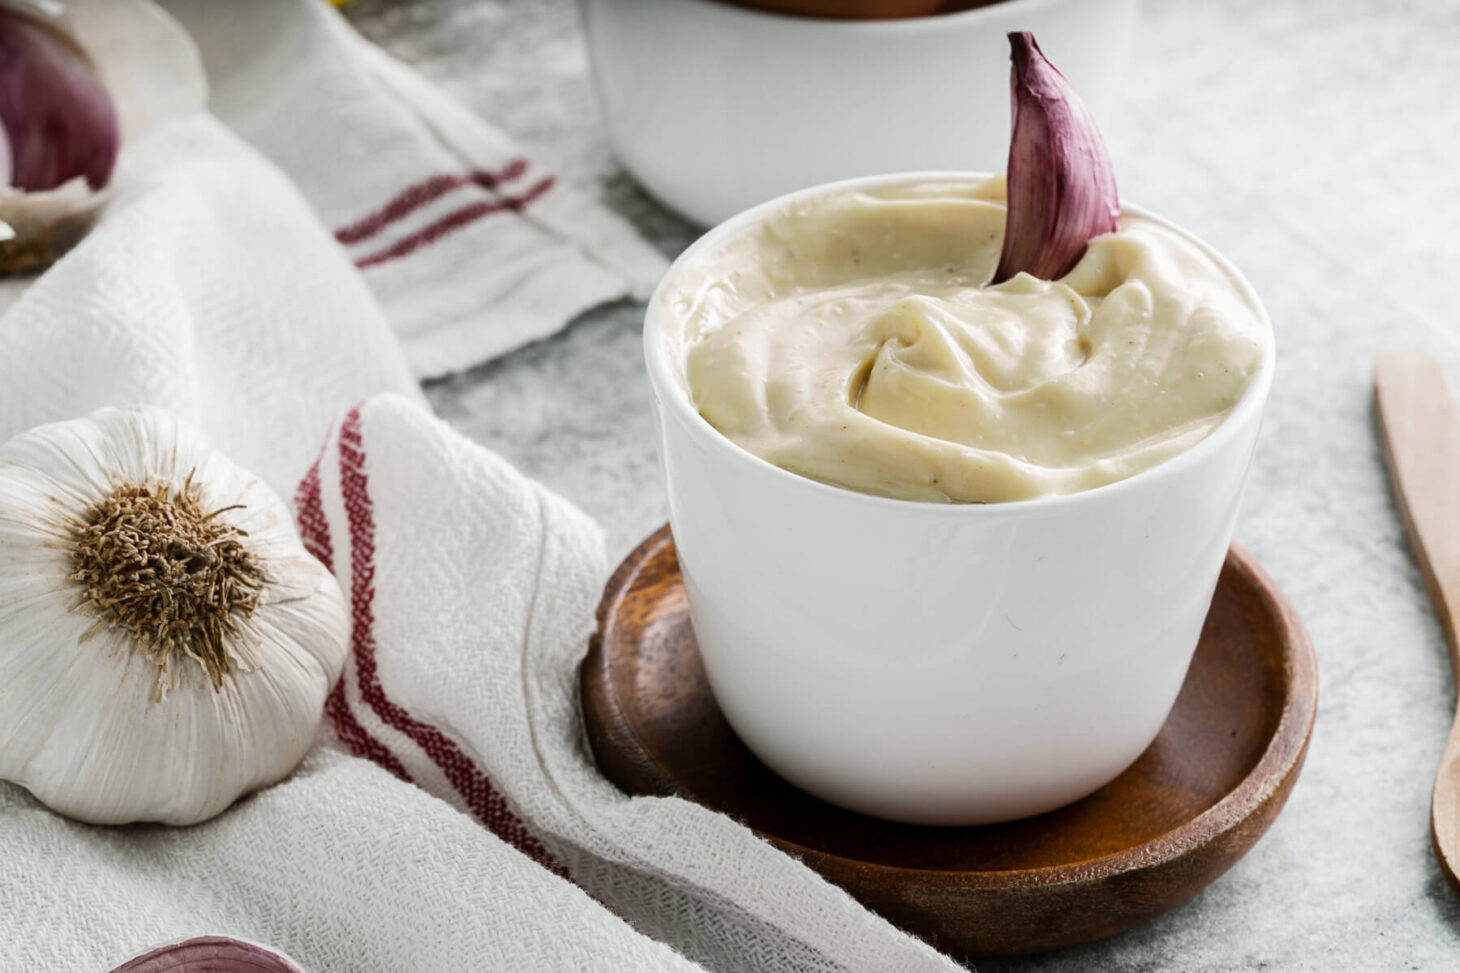 A small white dish filled with creamy Homemade Aioli garnished with a purple clove of garlic.